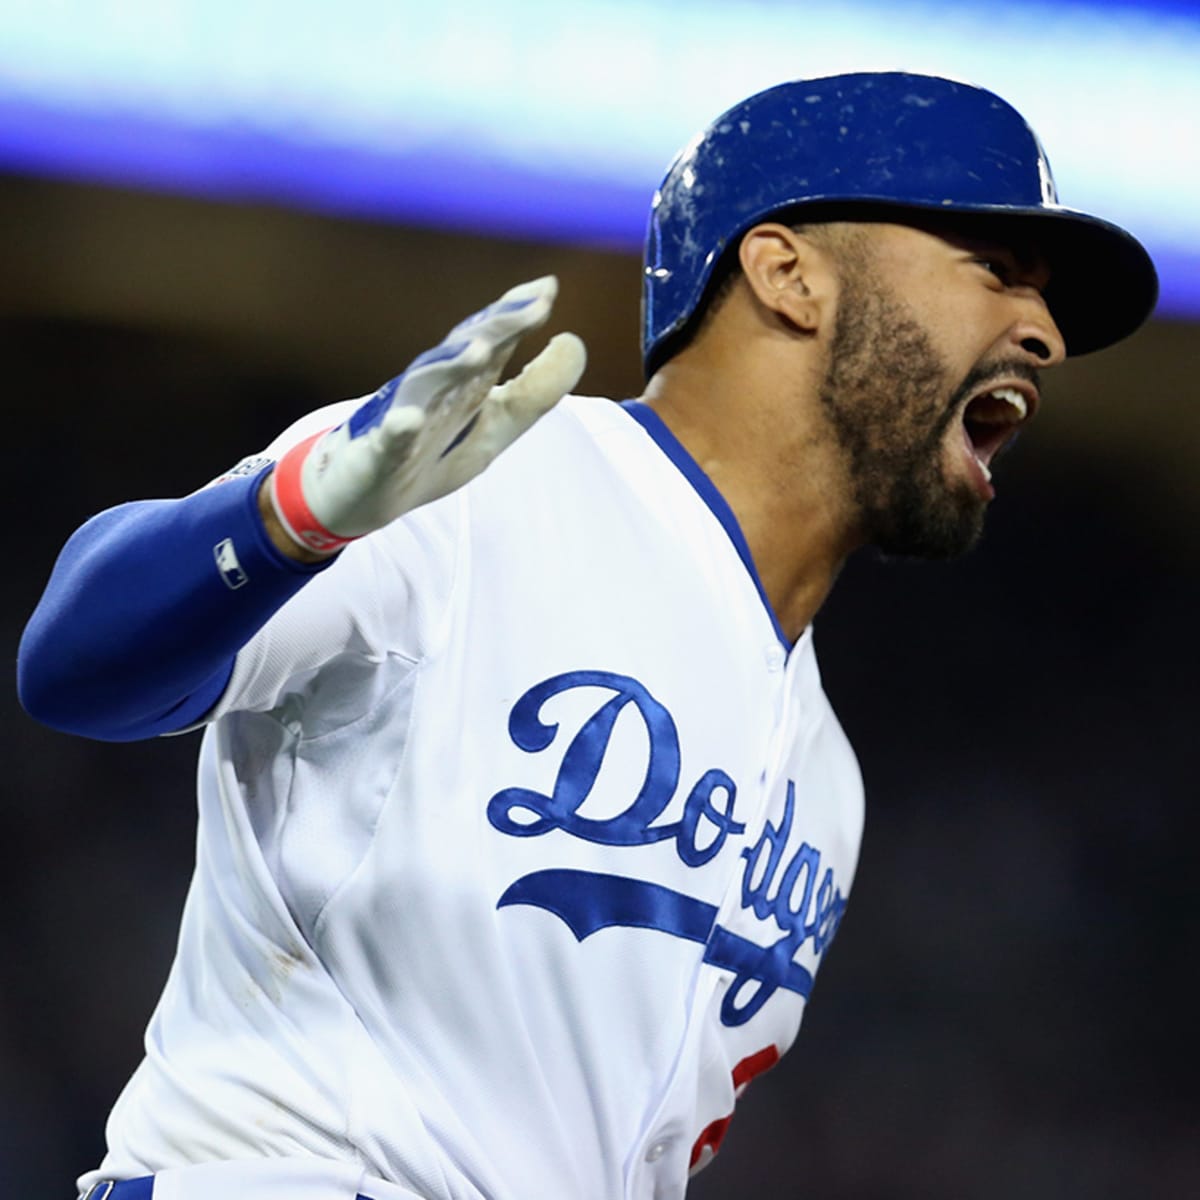 Los Angeles Dodgers outfielder Matt Kemp to the Padres - Sports